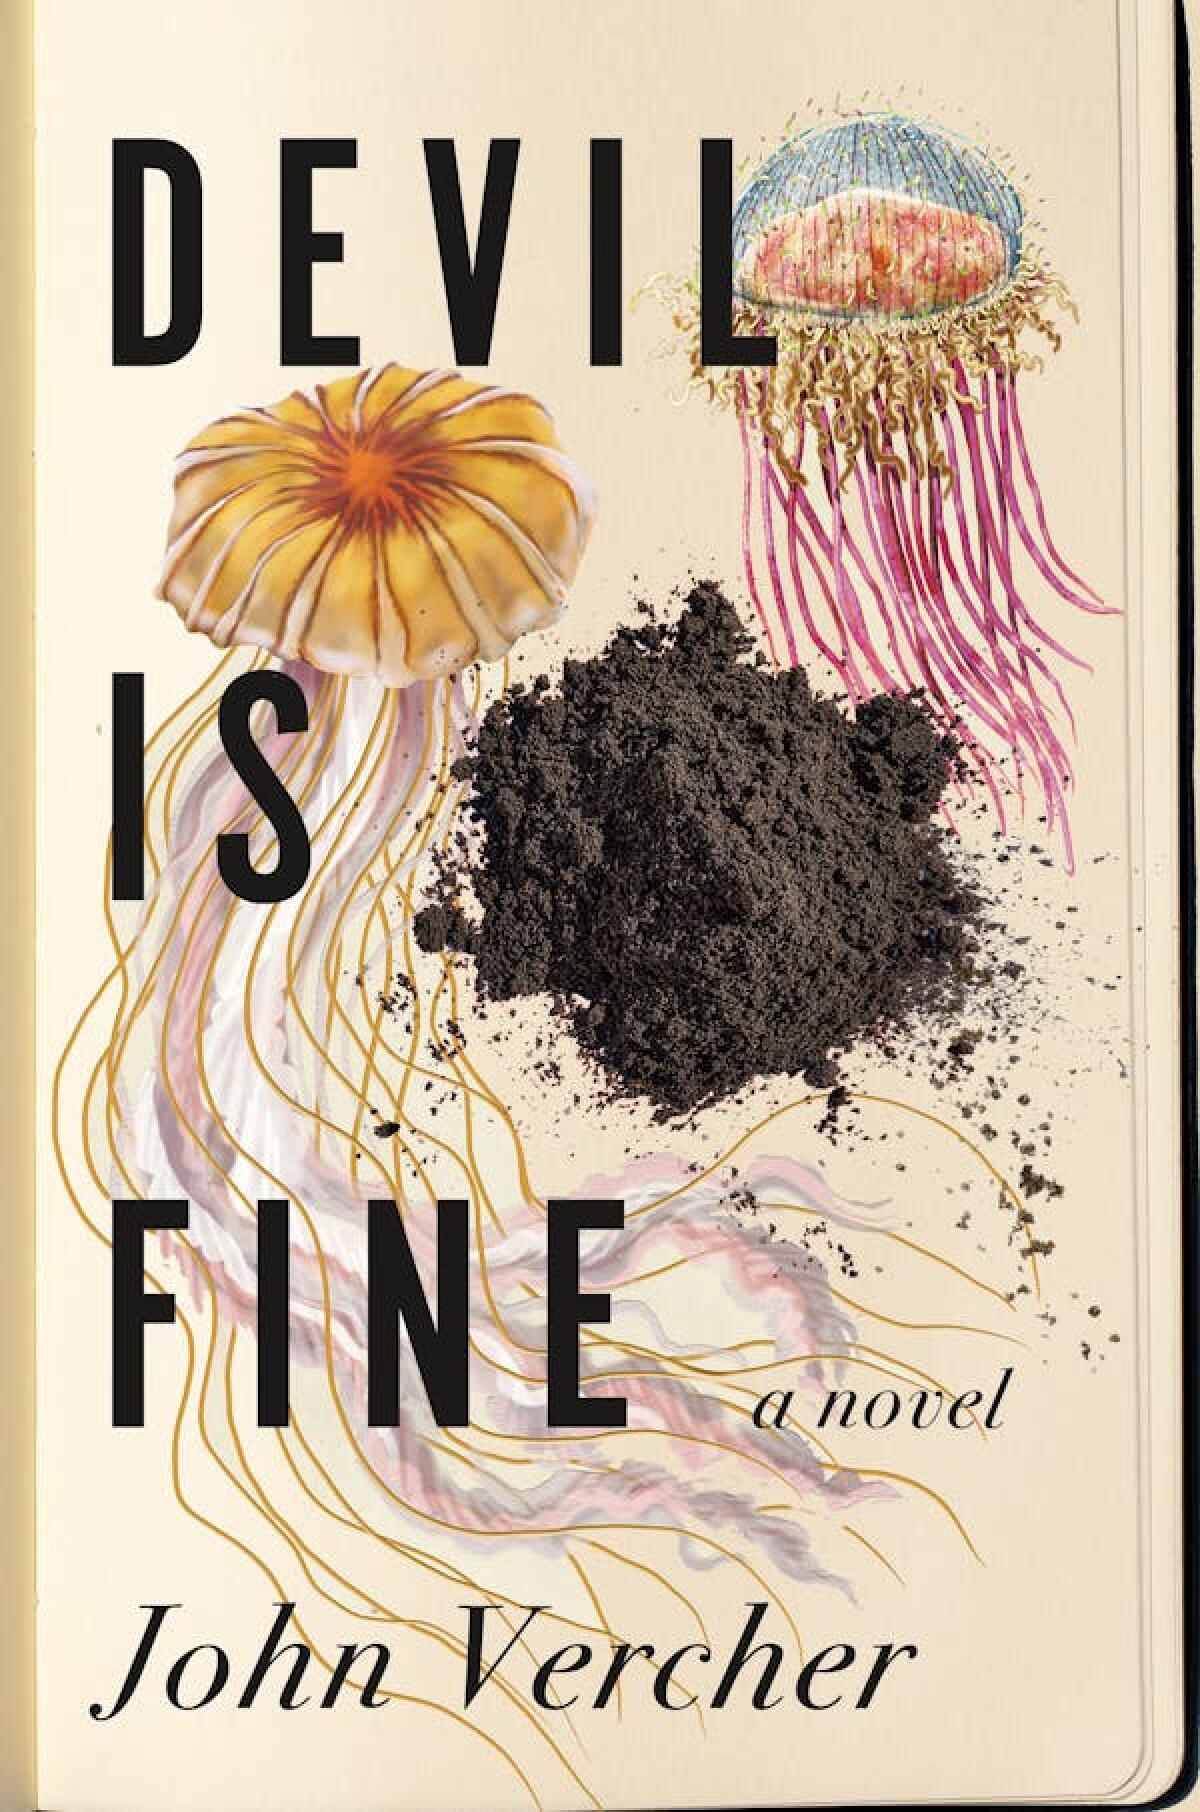 The cover of "Devil Is Fine"